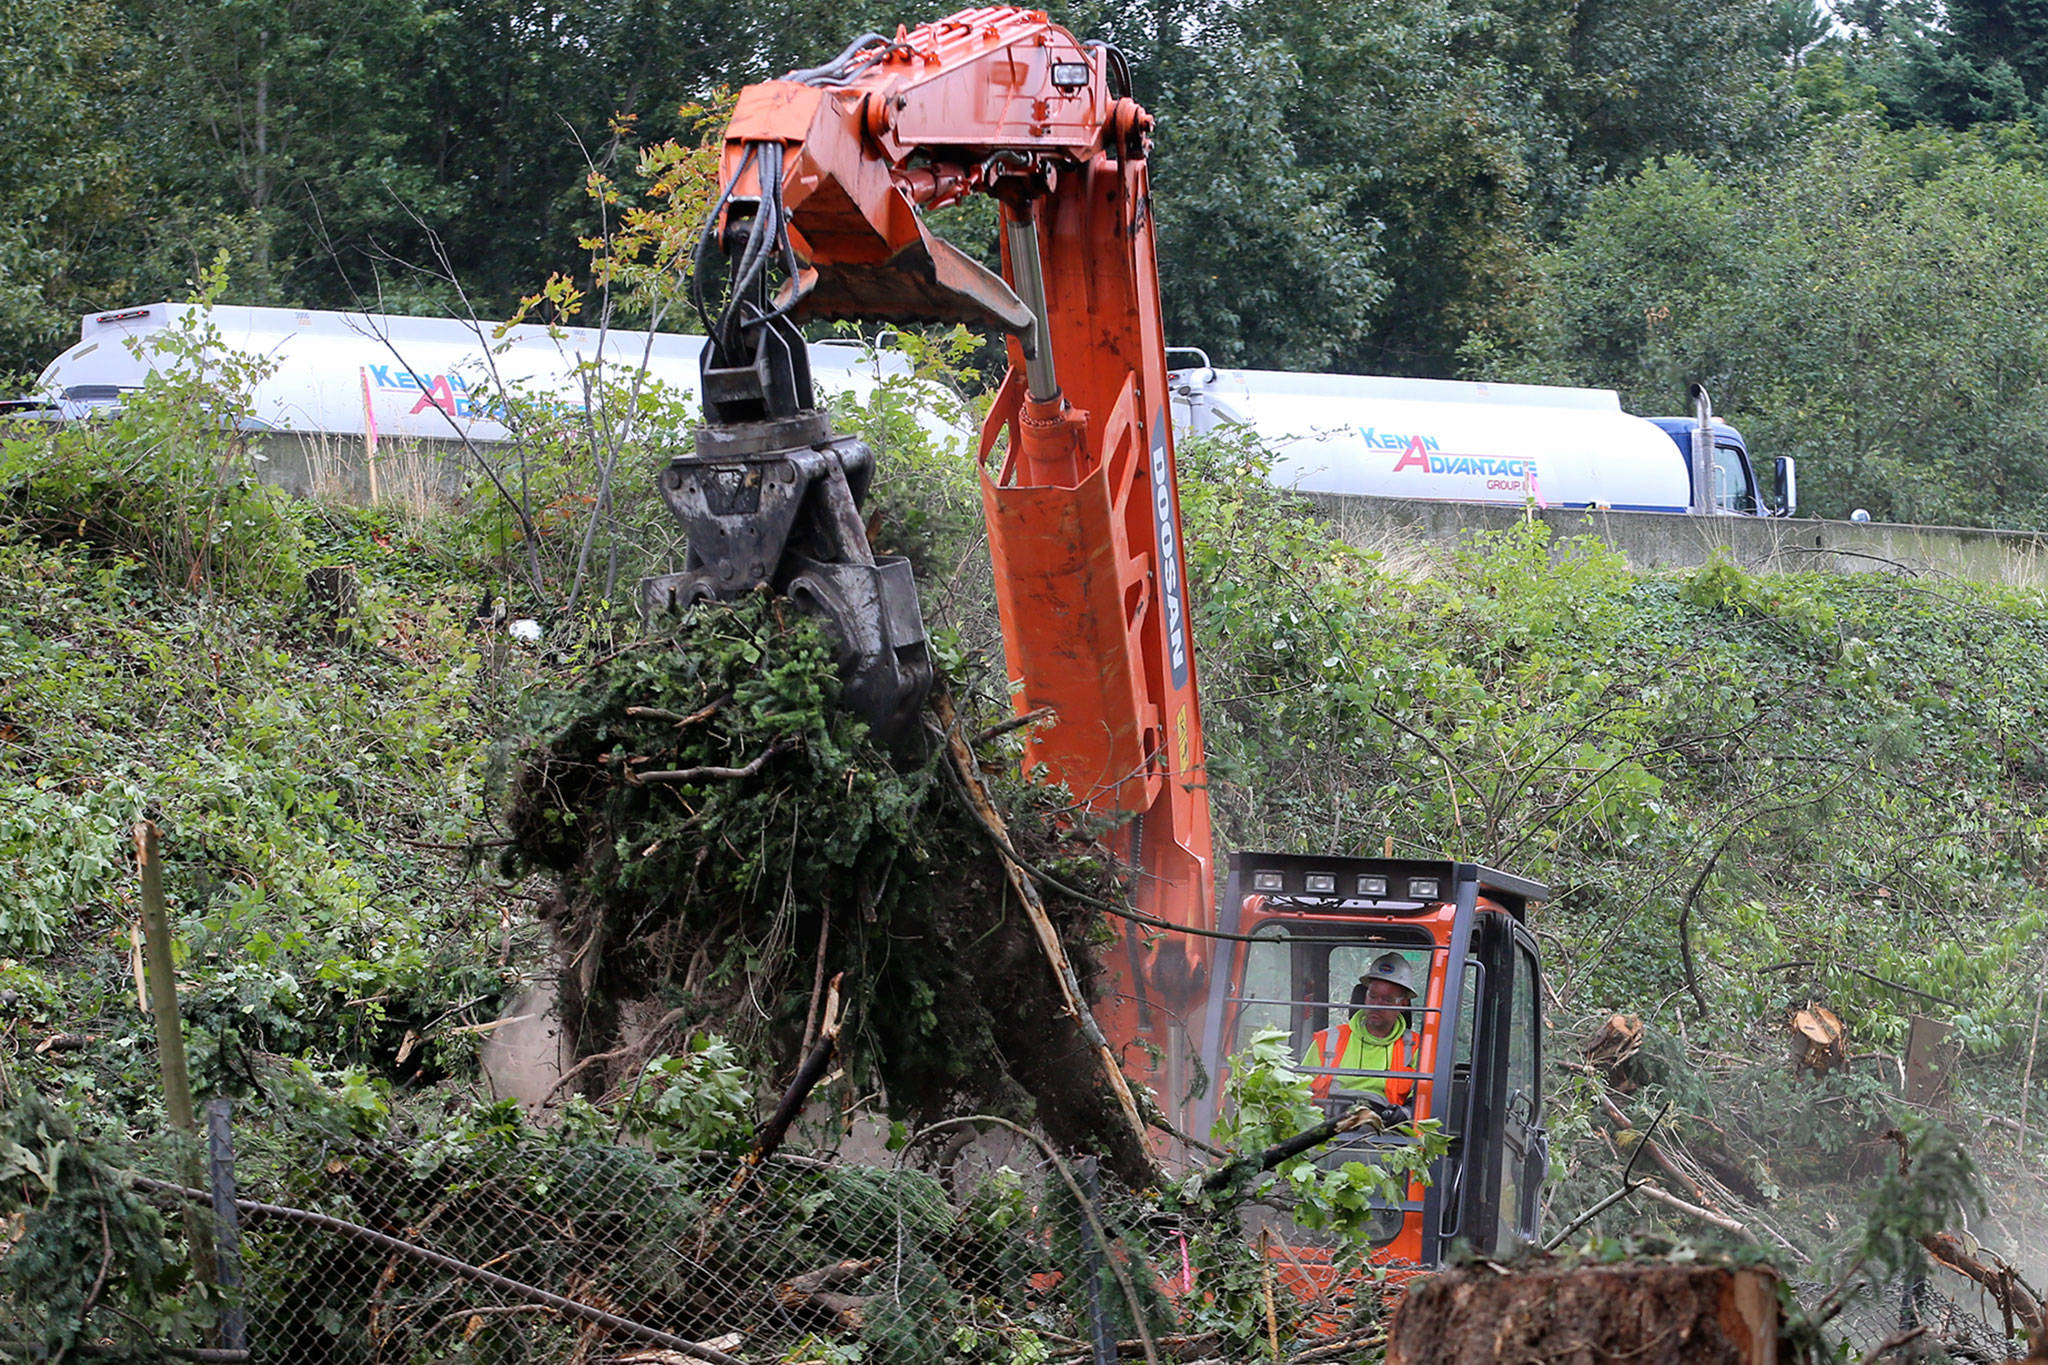 Tree and brush clearing continues in Mountlake Terrace along I-5 in preparation for the light extension to Lynnwood slated to be completed in 2024. (Kevin Clark / The Herald)